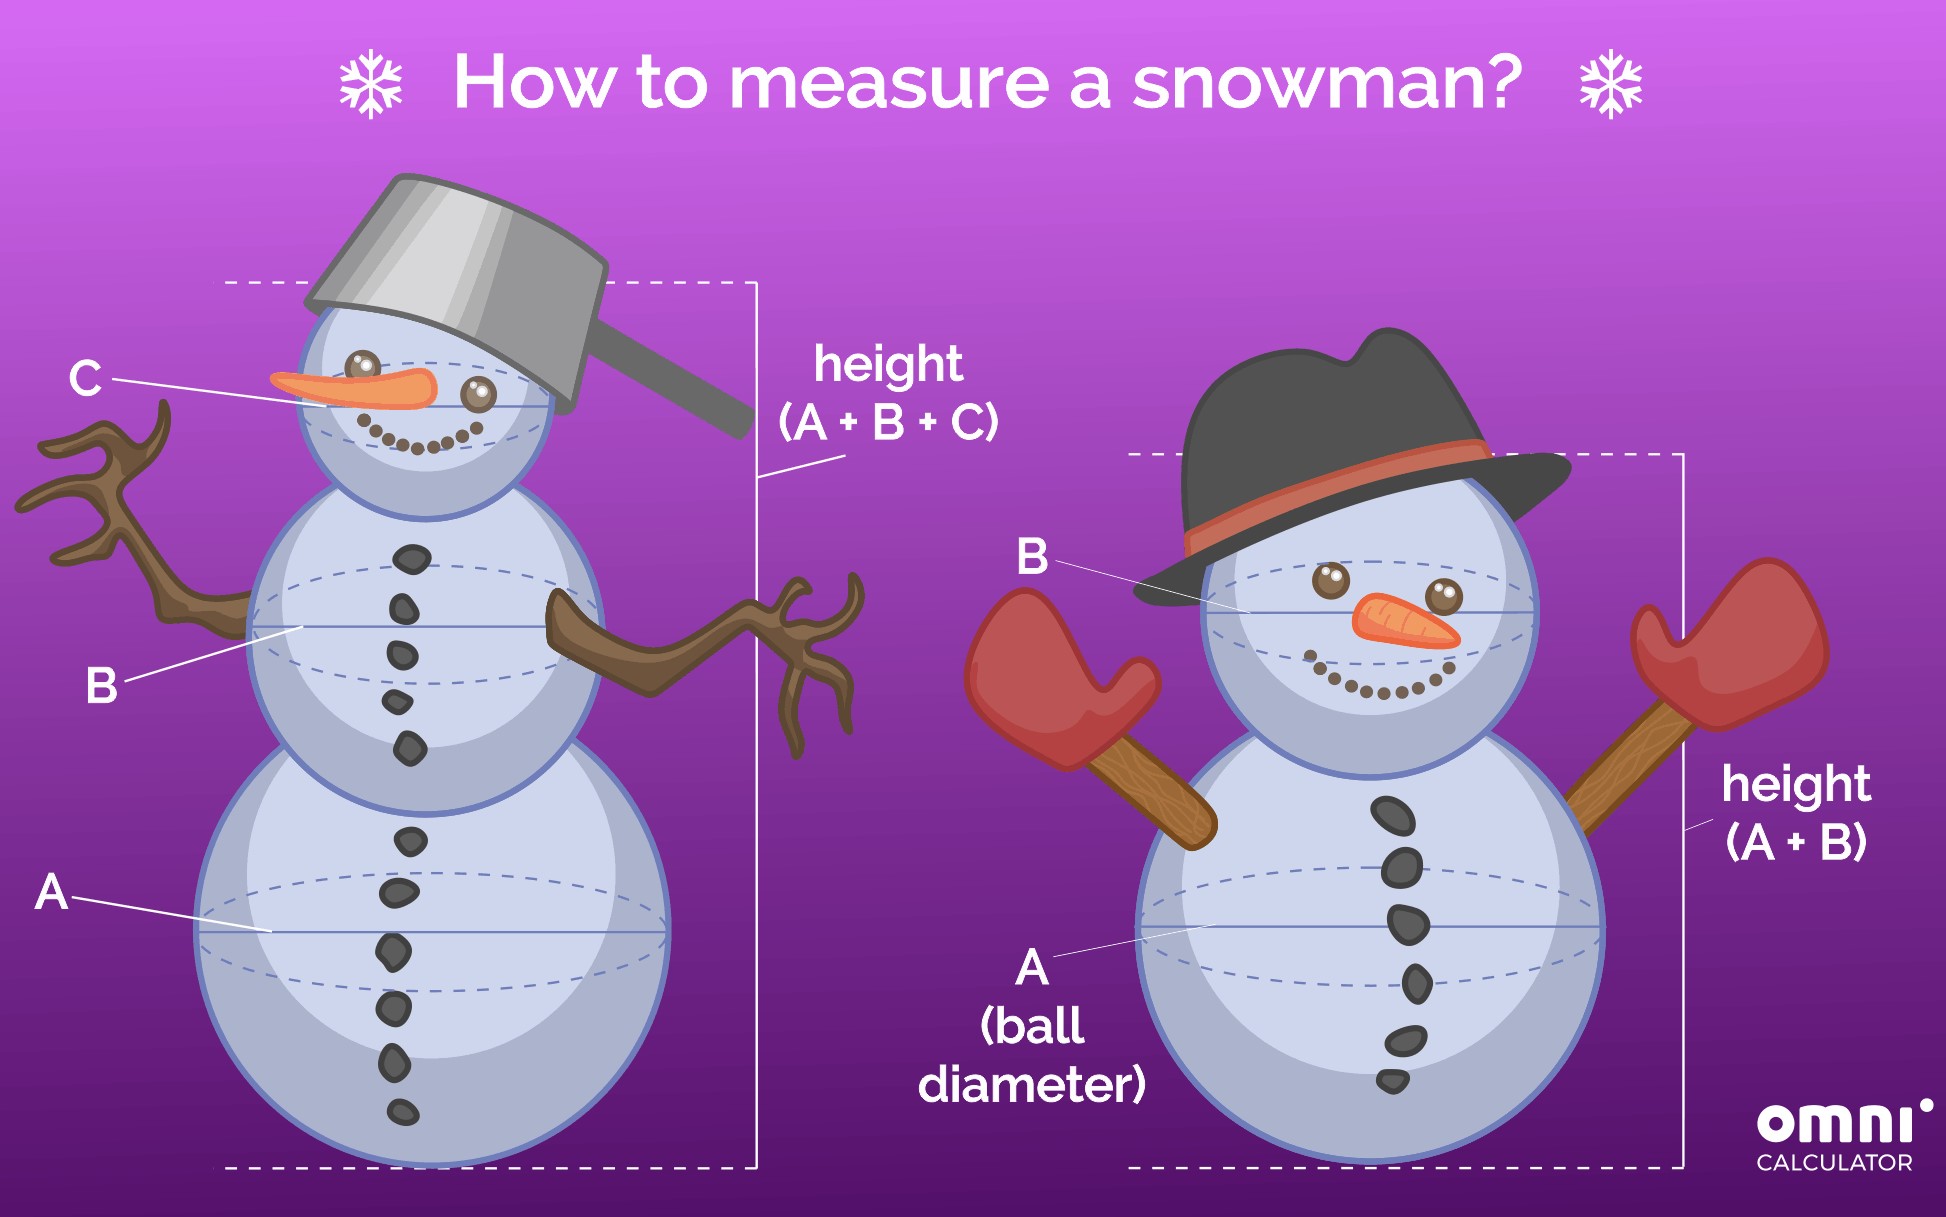 Building A Snowman Online Snowman Calculator Can Help Create Mathematically Perfect Proportions Globalnews Ca